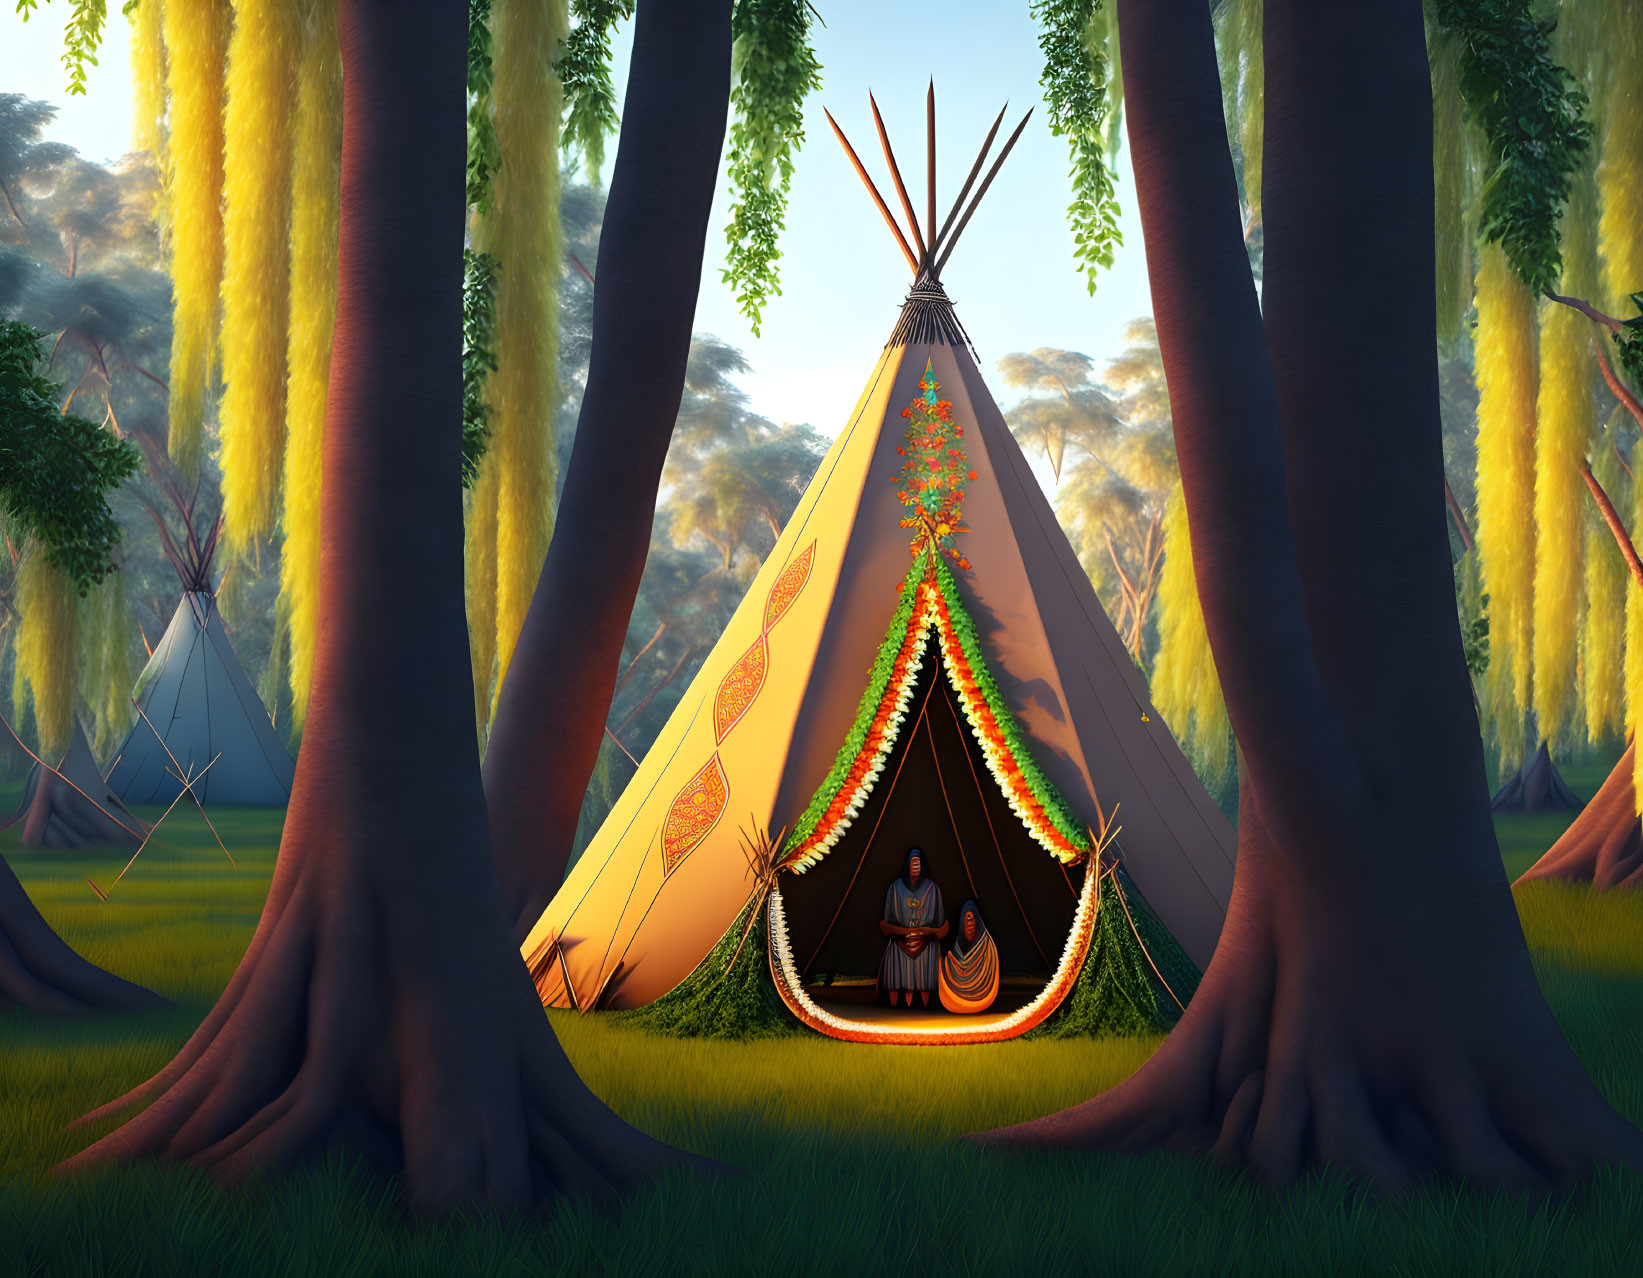 Teepee illustration in forest with yellow flowers & evening glow